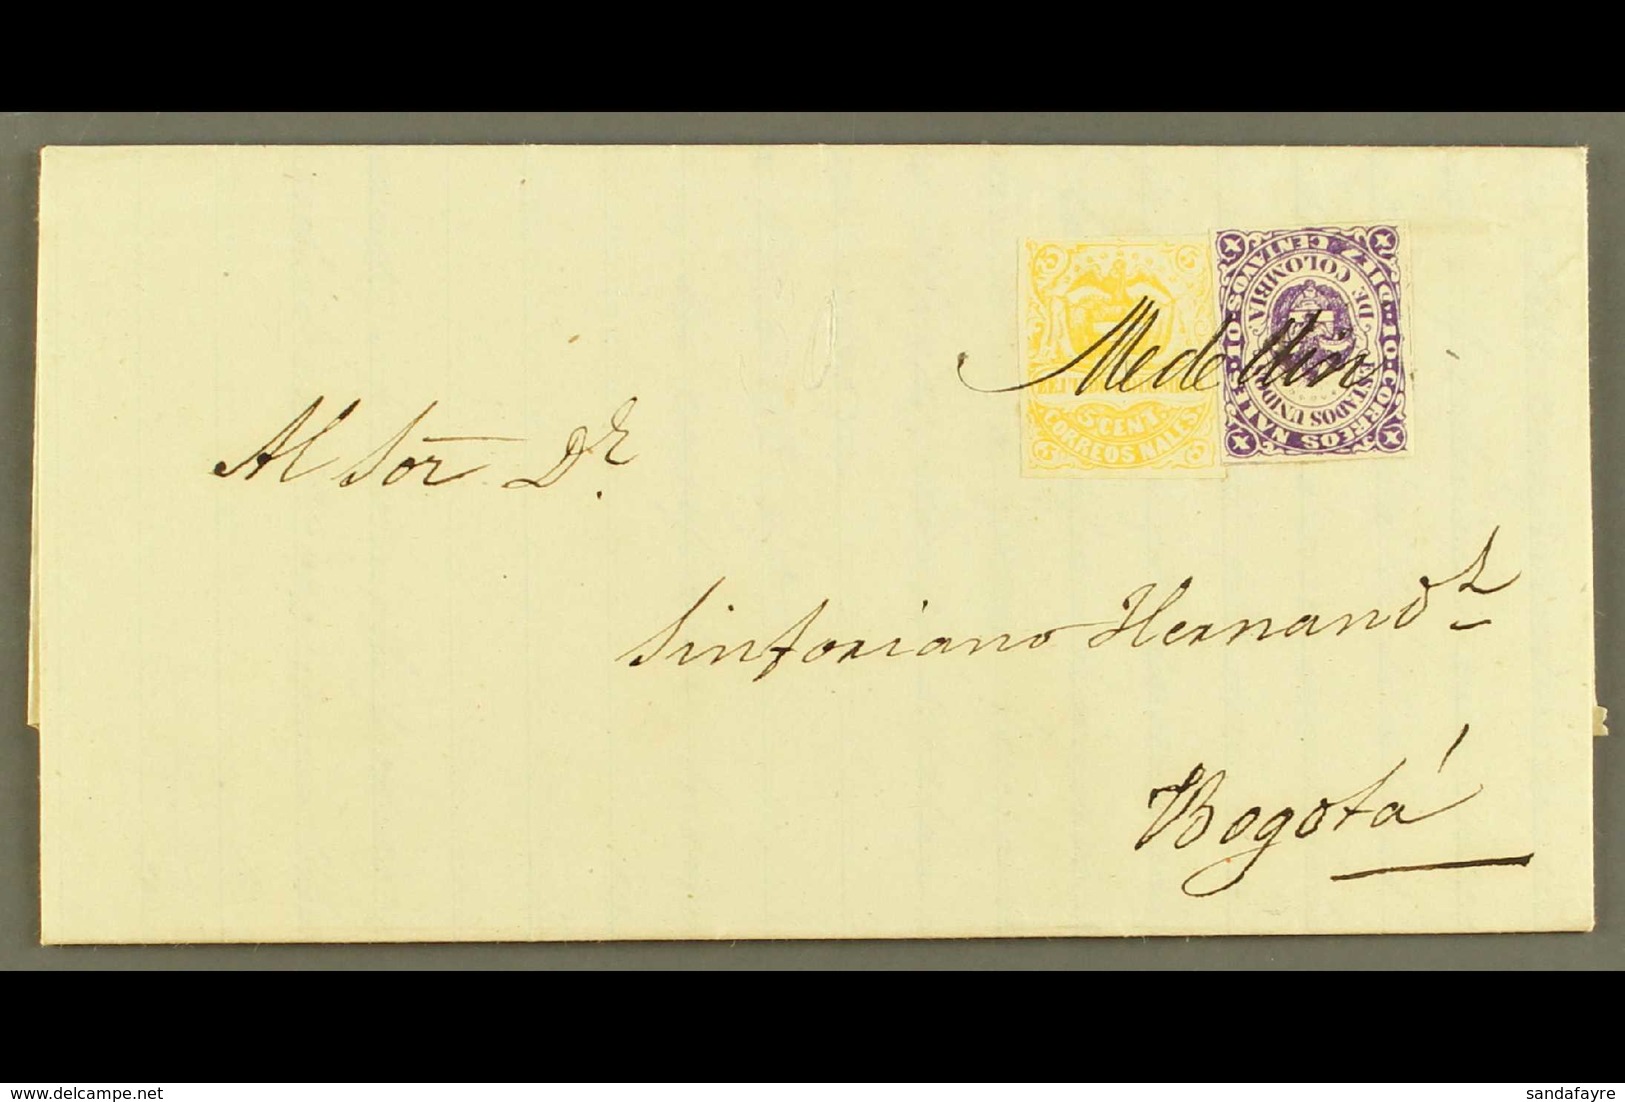 1872 (3 SEP) ENTIRE LETTER  From Medellin To Bogota Bearing 1868 10c Violet Type II, Scott 54c, And 1870 5c Yellow, Scot - Kolumbien